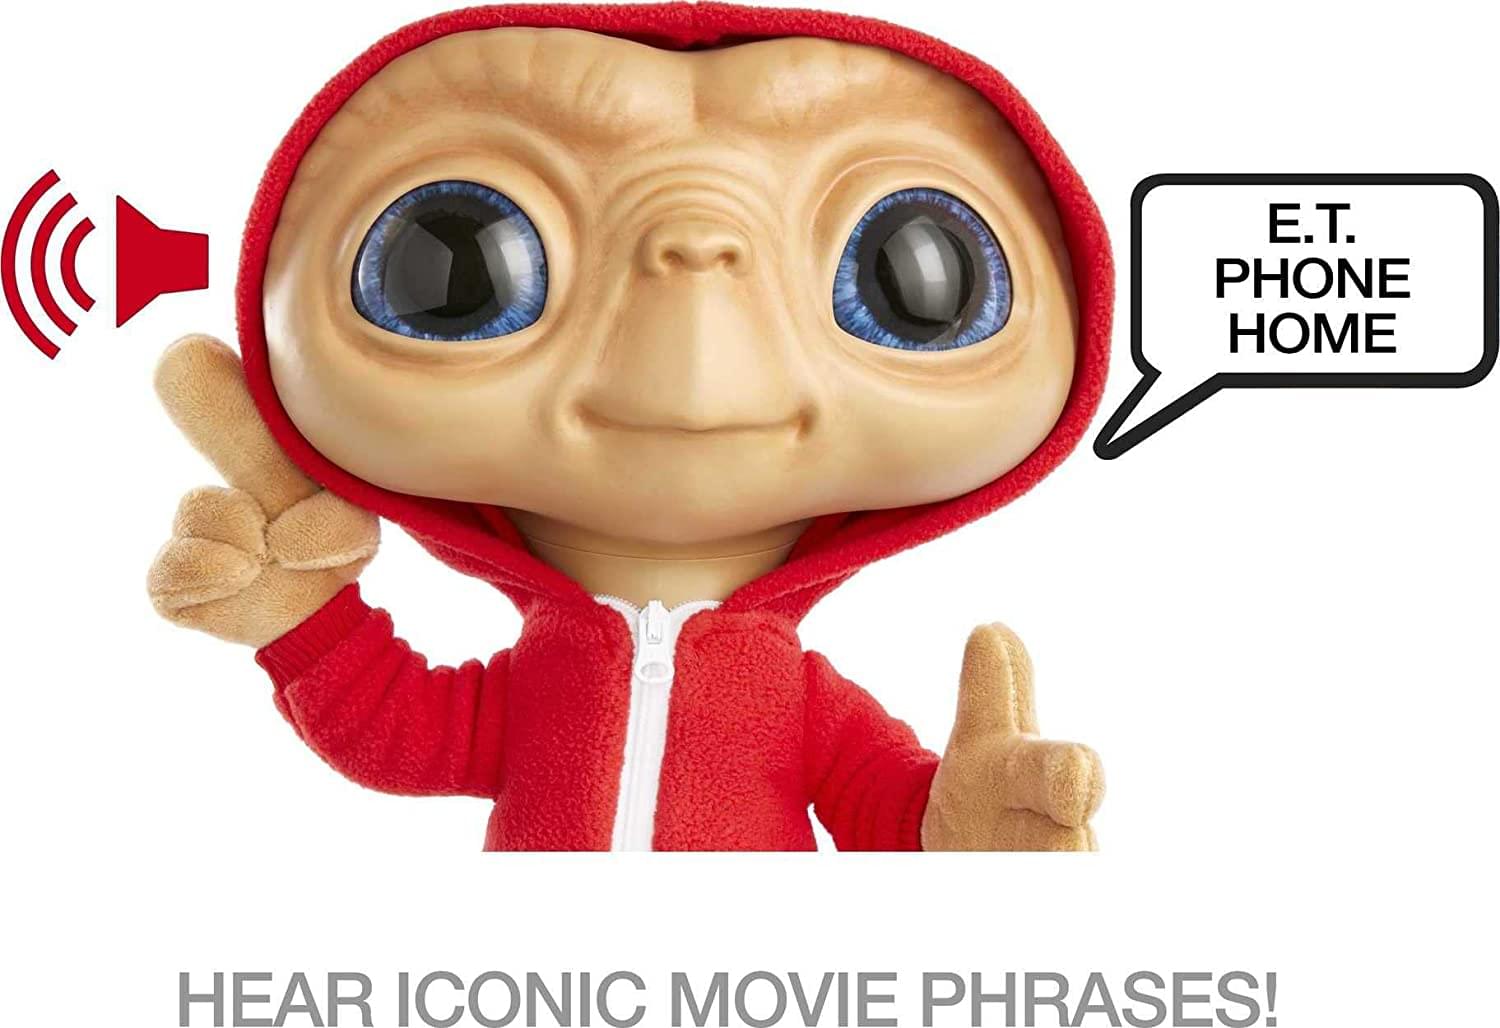 E.T. The Extra-Terrestrial 40th Anniversary 11 Inch Plush with Lights and Sound